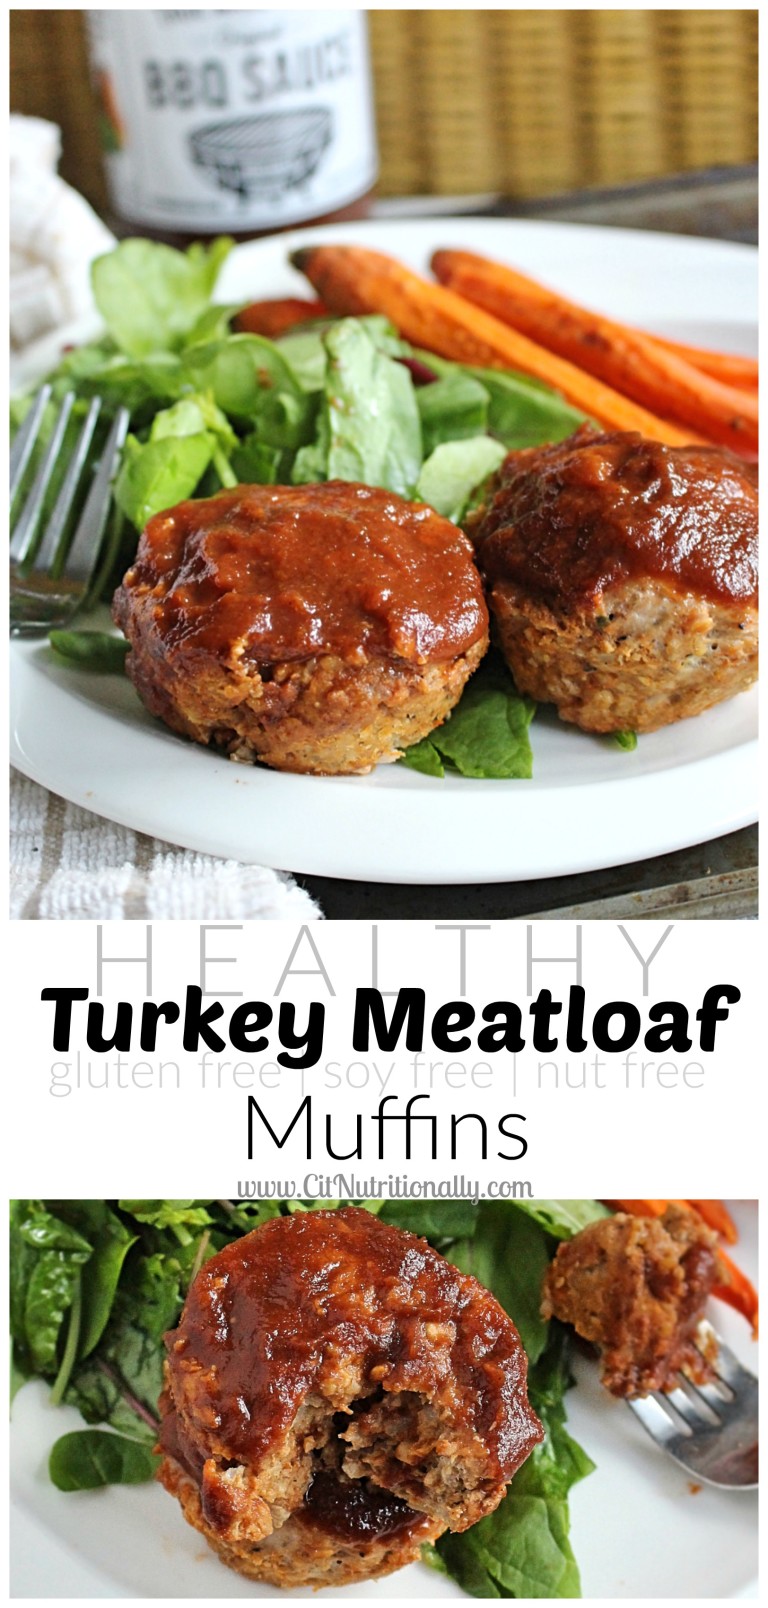 Healthy Turkey Meatloaf Muffins - Chelsey Amer